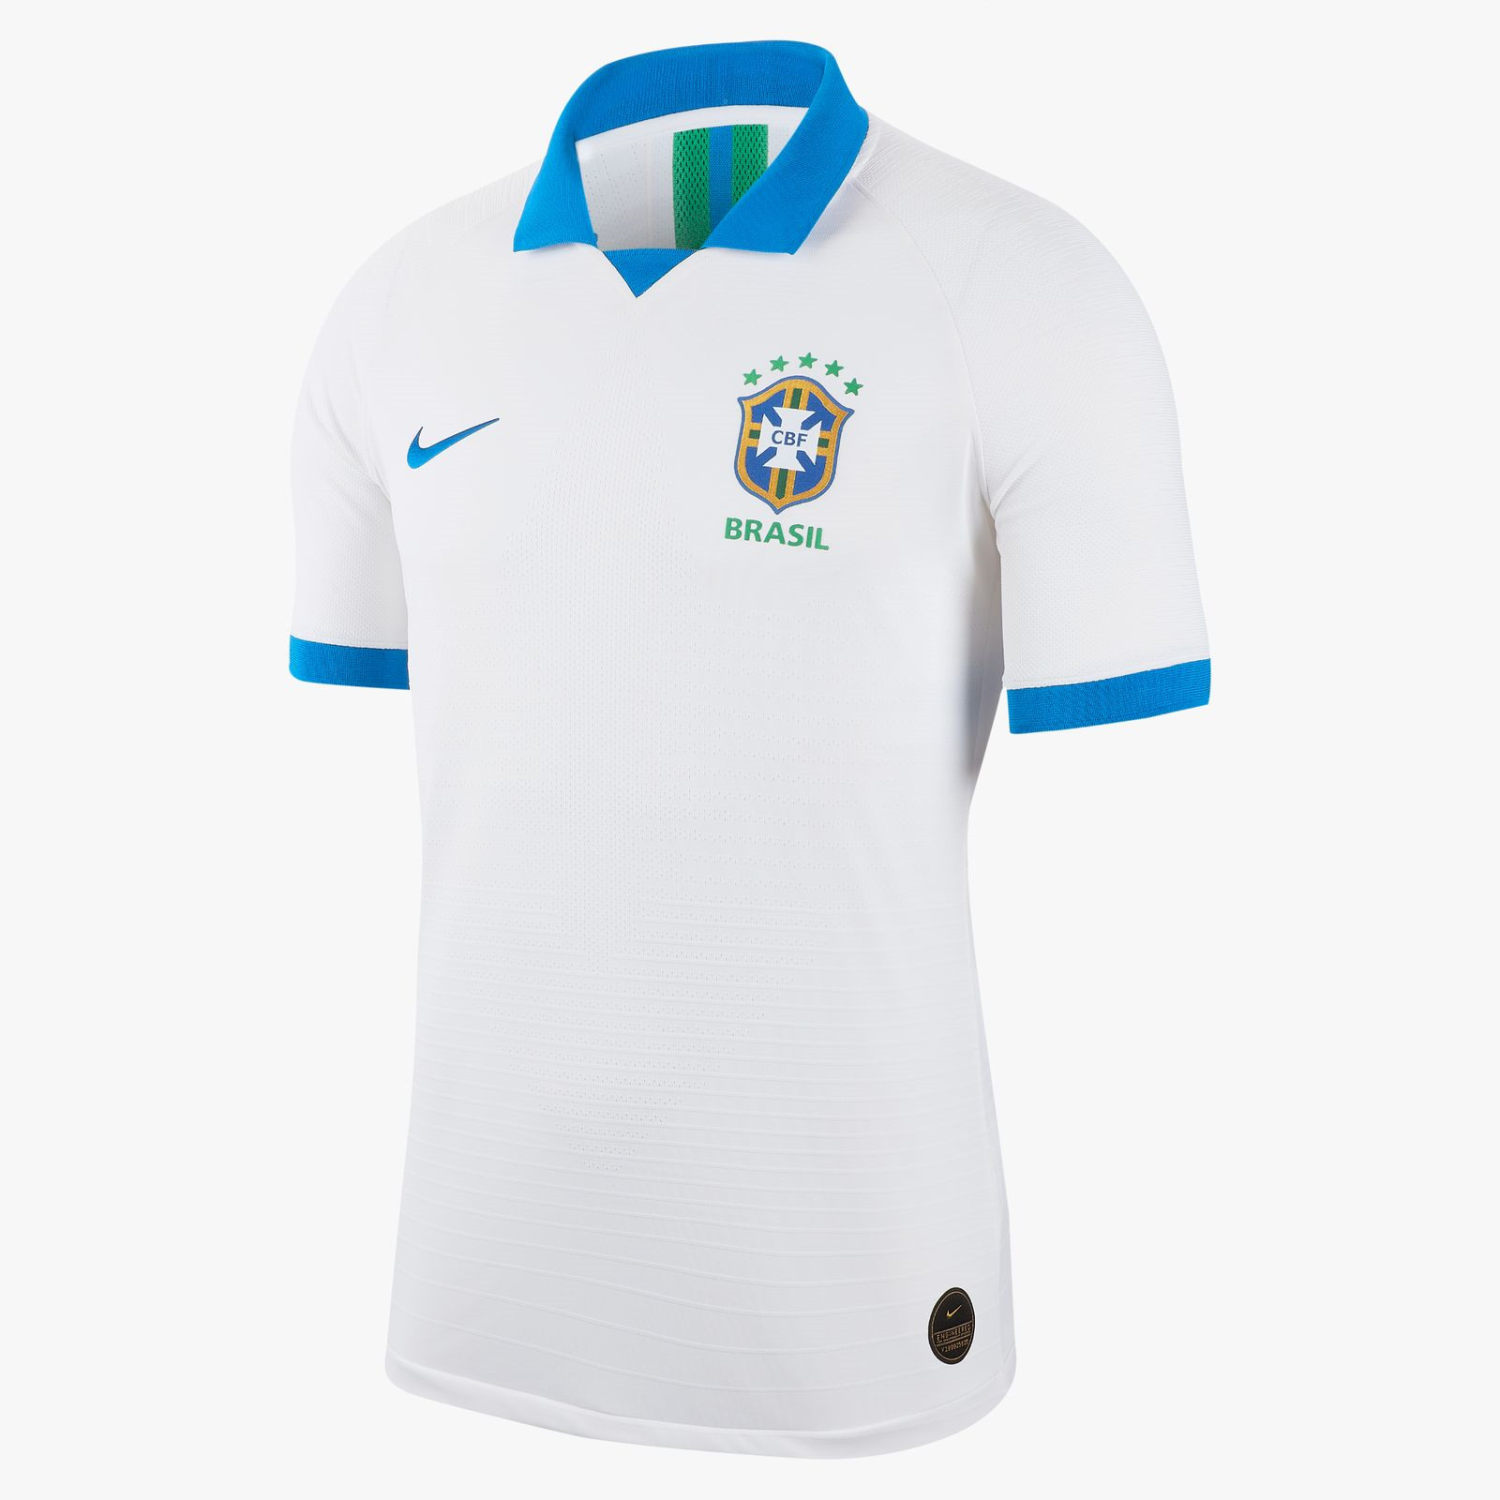 Brazil national team 2019 Copa America home and special edition jersey